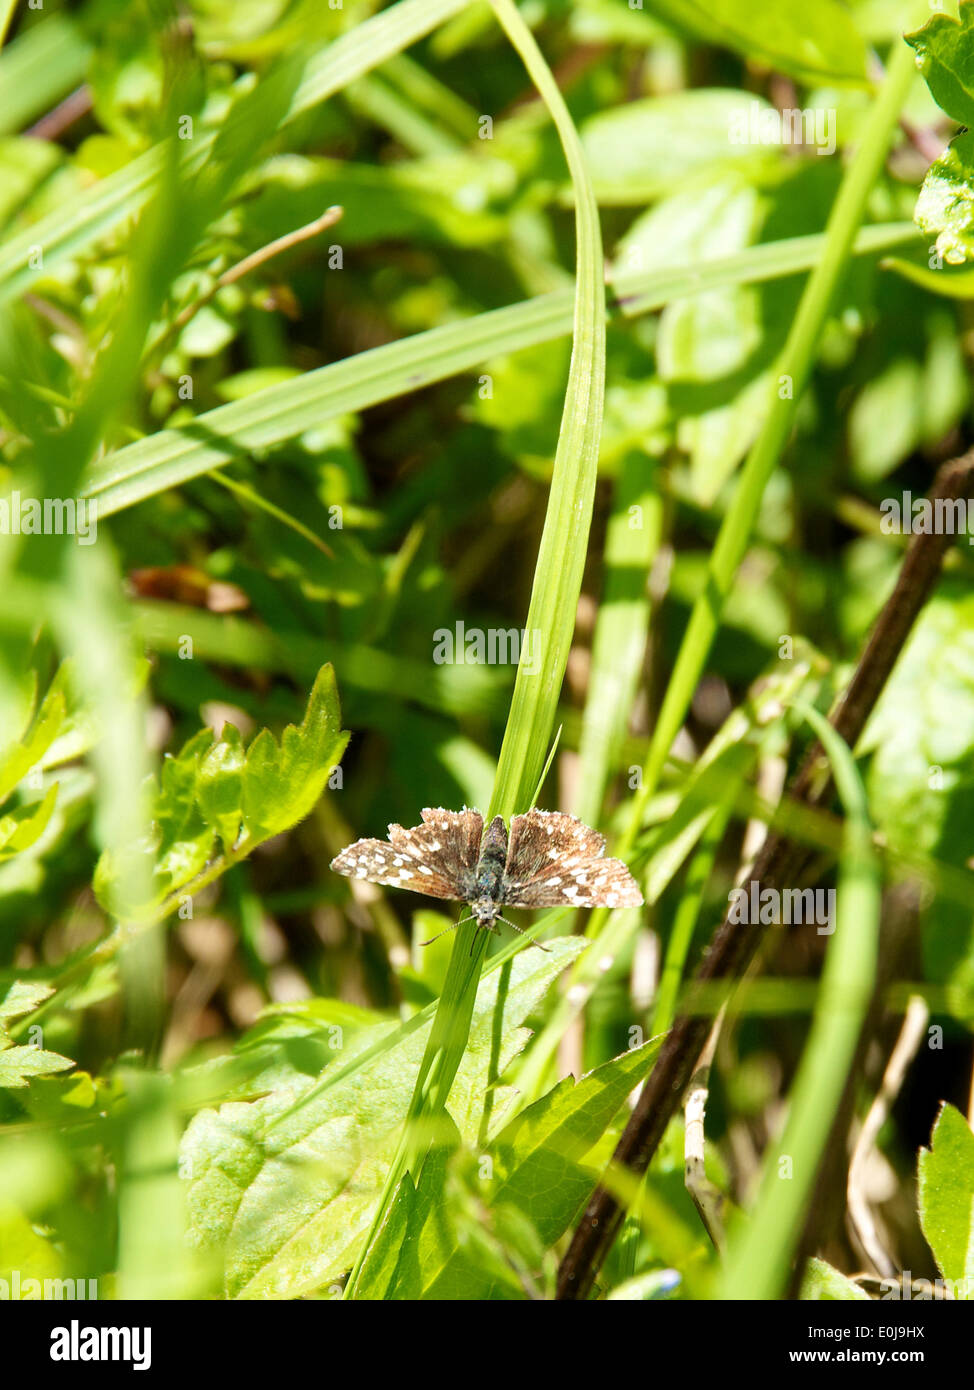 Reigate, Surrey. UK. Wednesday 14th May 2014. Flora and fauna on the North Downs. A Bordered White Day flying Moth 'Bupalus piniaria' rests in the sunshine on blade of grass at Reigate Hill, Surrey, Wednesday 14th May 2014  Credit:  Photo by Lindsay Constable /Alamy Live News Stock Photo